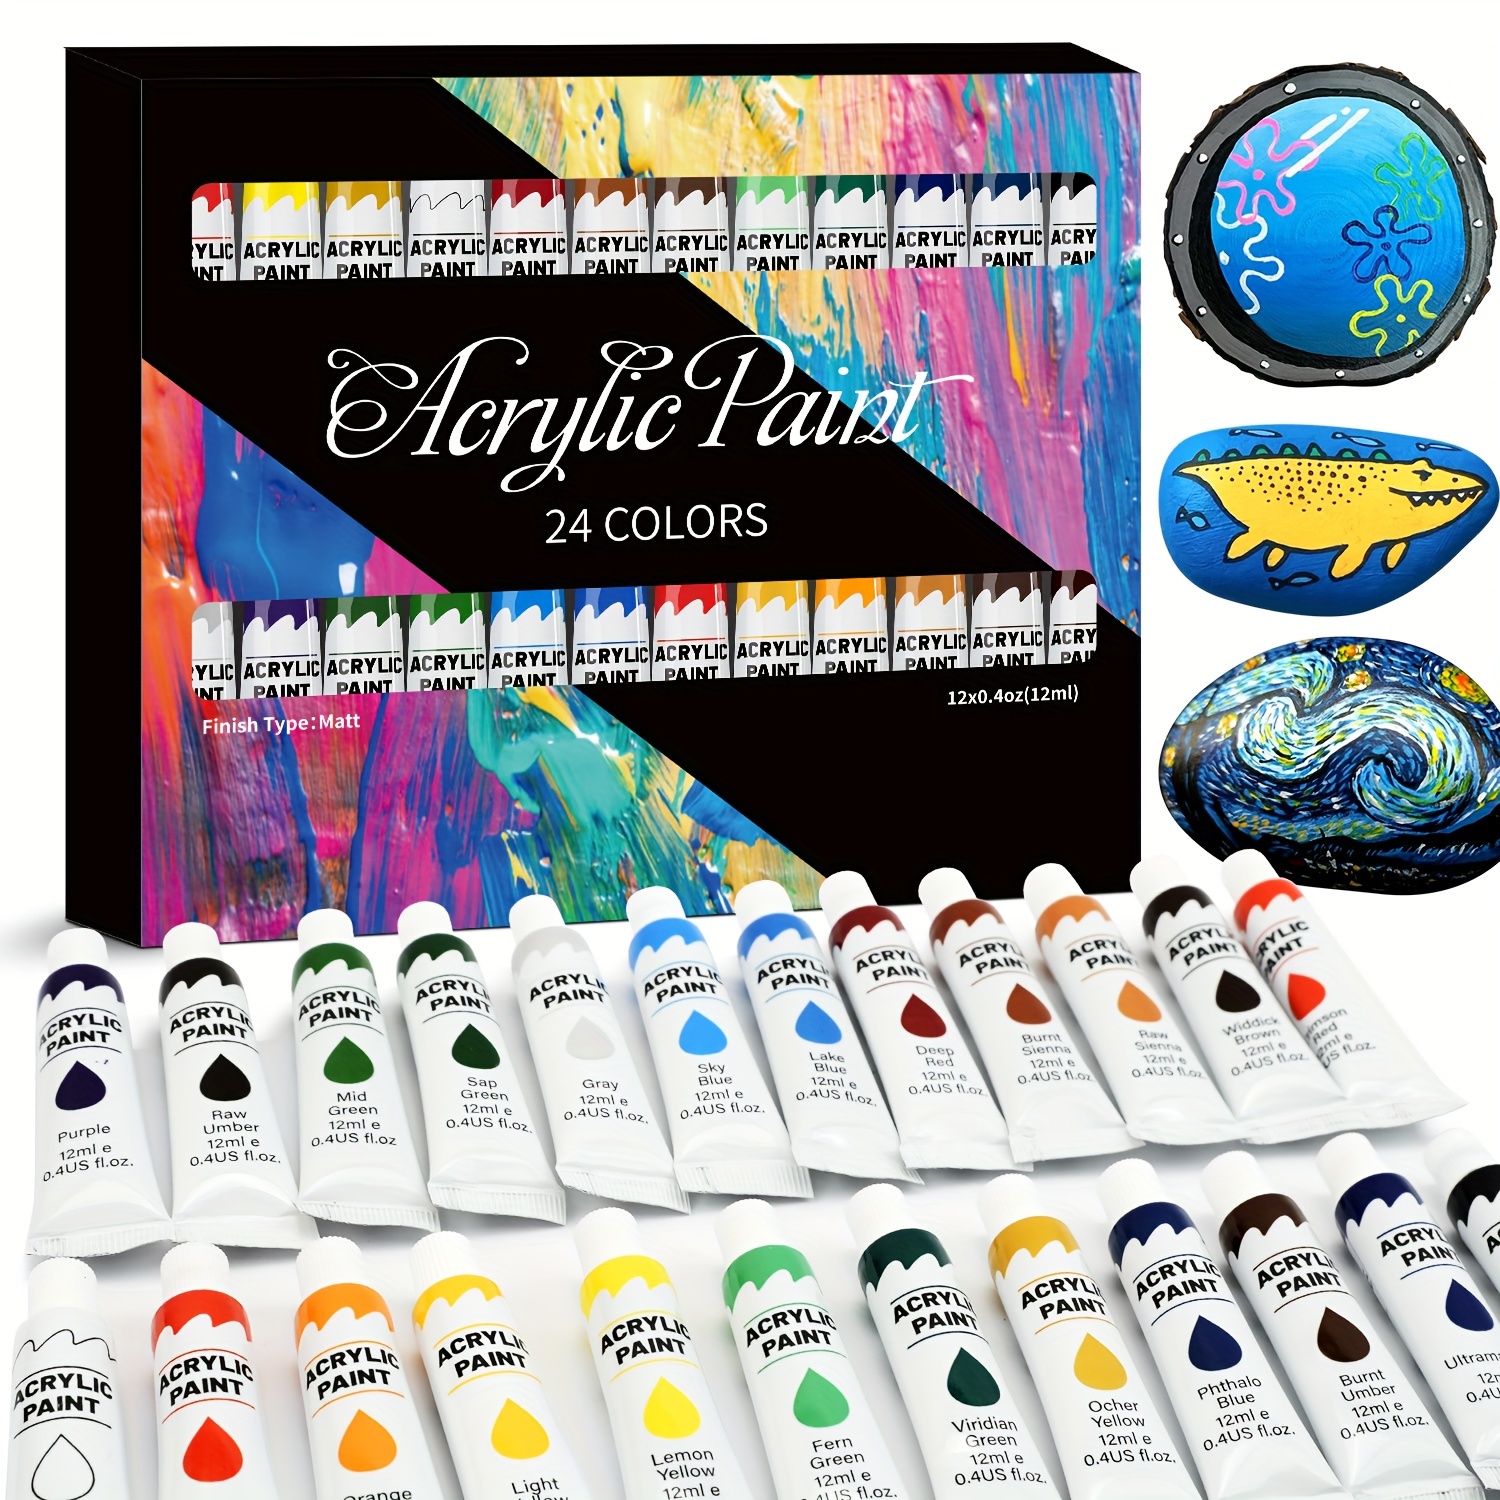 

24 Colors Acrylic Paint Set With Rich Pigment And Non-fading Colors -ideal For Artists, Hobbyists, Fabric, Canvas Painting And Decorations